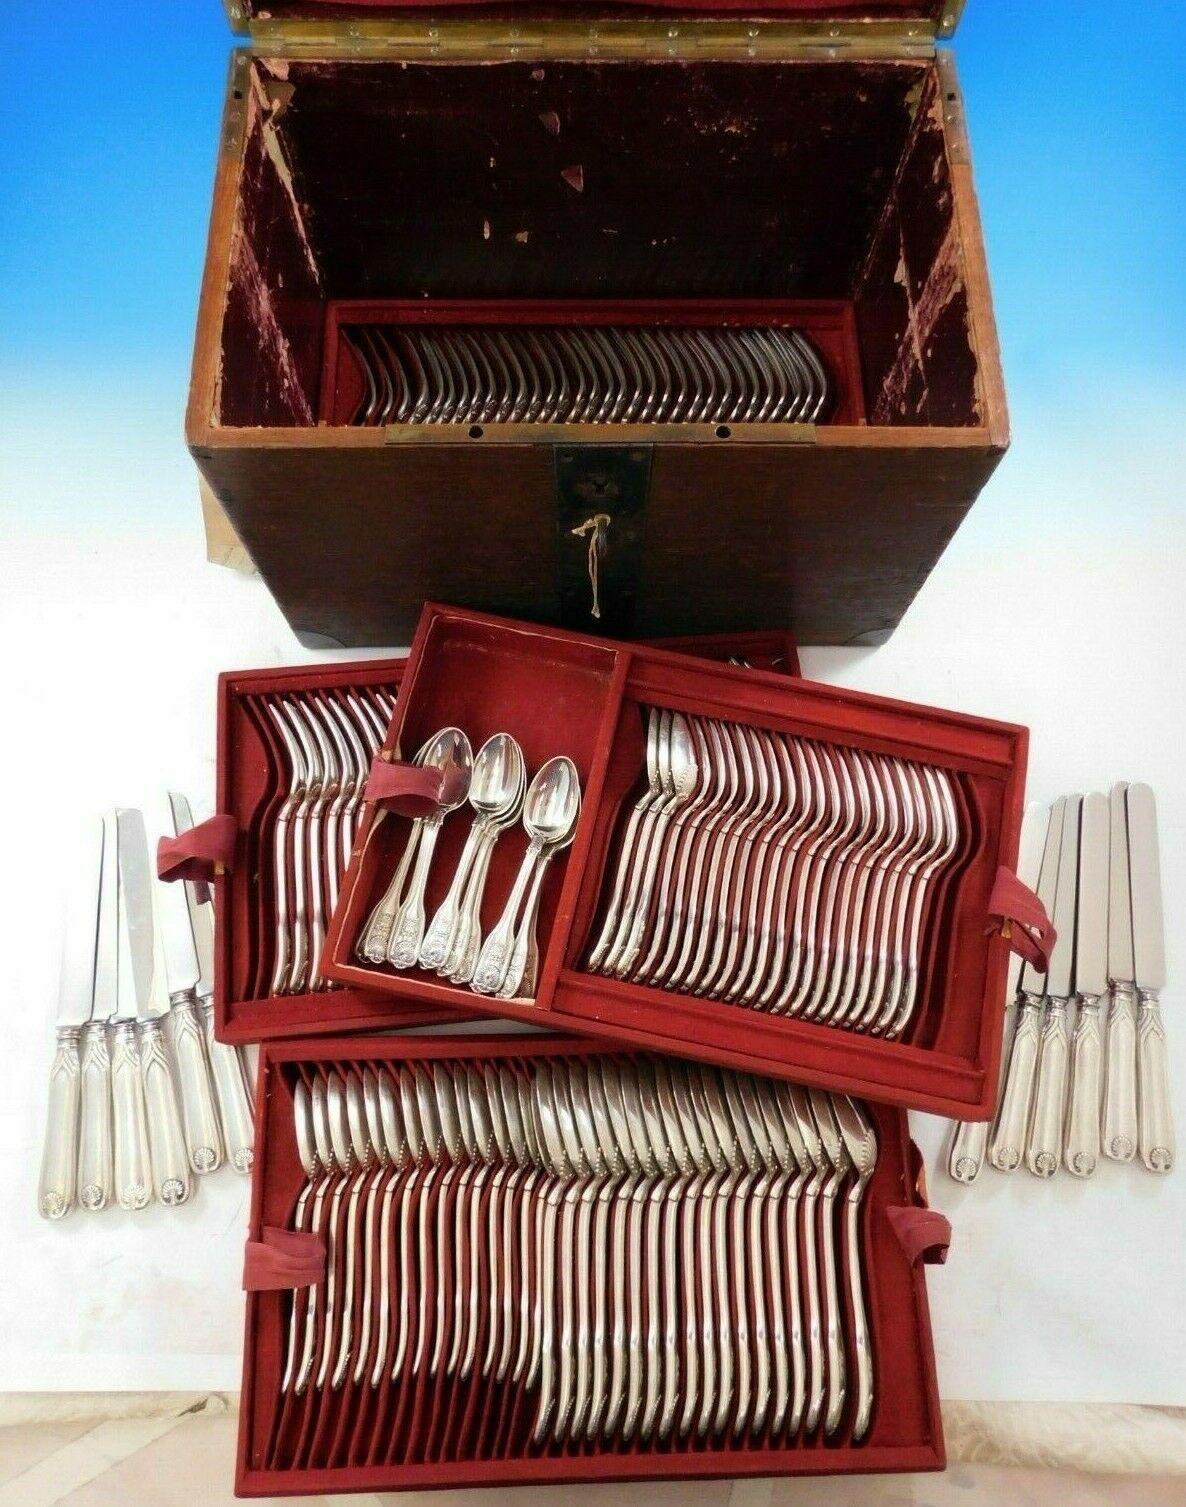 Exceedingly rare custom Tiffany & Co. sterling silver flatware set, 143 pieces (including 12 palm dinner hnives). This service includes:

12 dinner knives, 10 1/4